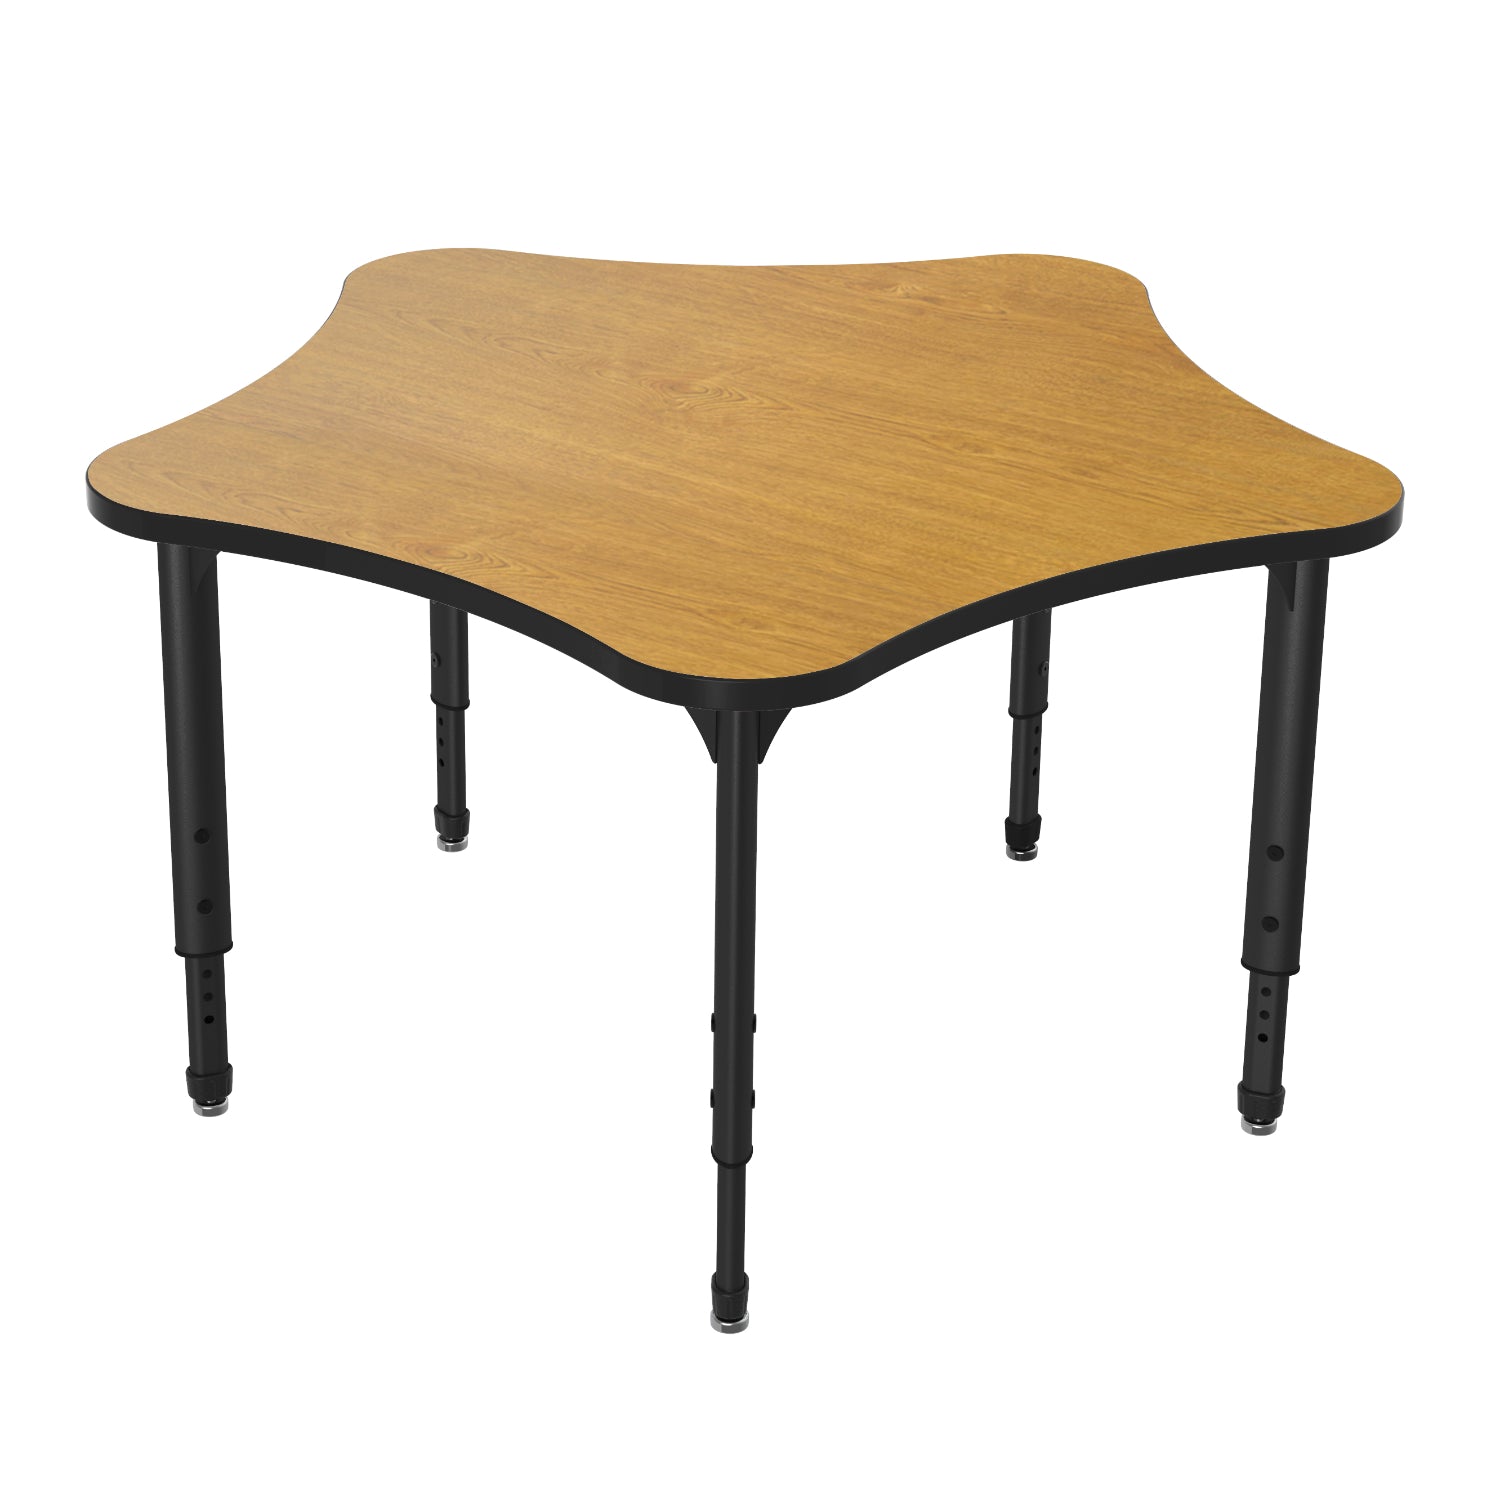 Apex Adjustable Height Collaborative Student Table, 48" 5 Star